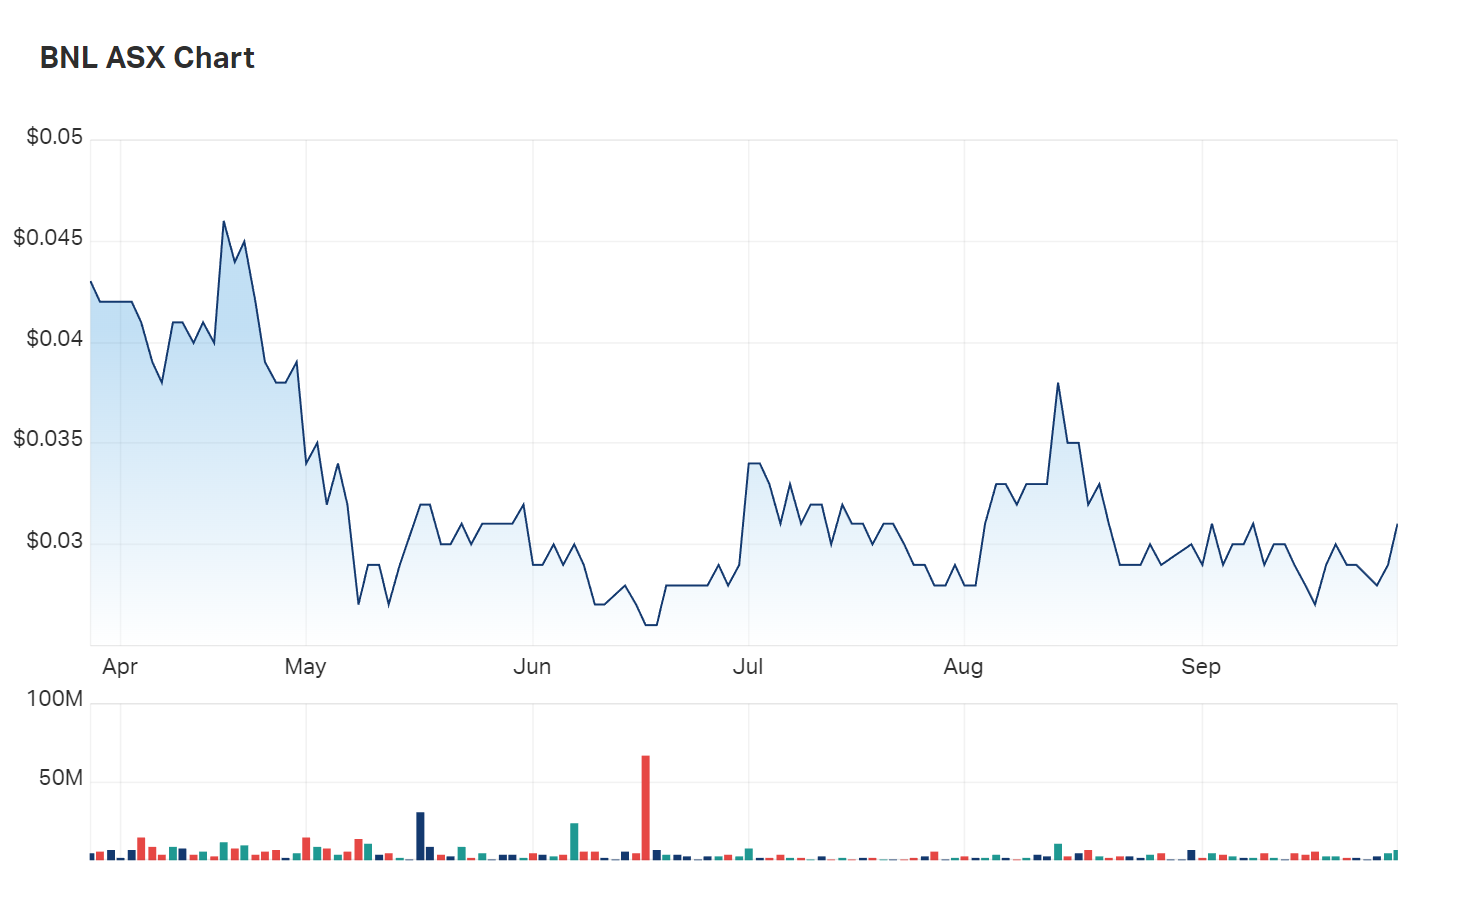 Blue Star Helium's six month charts 